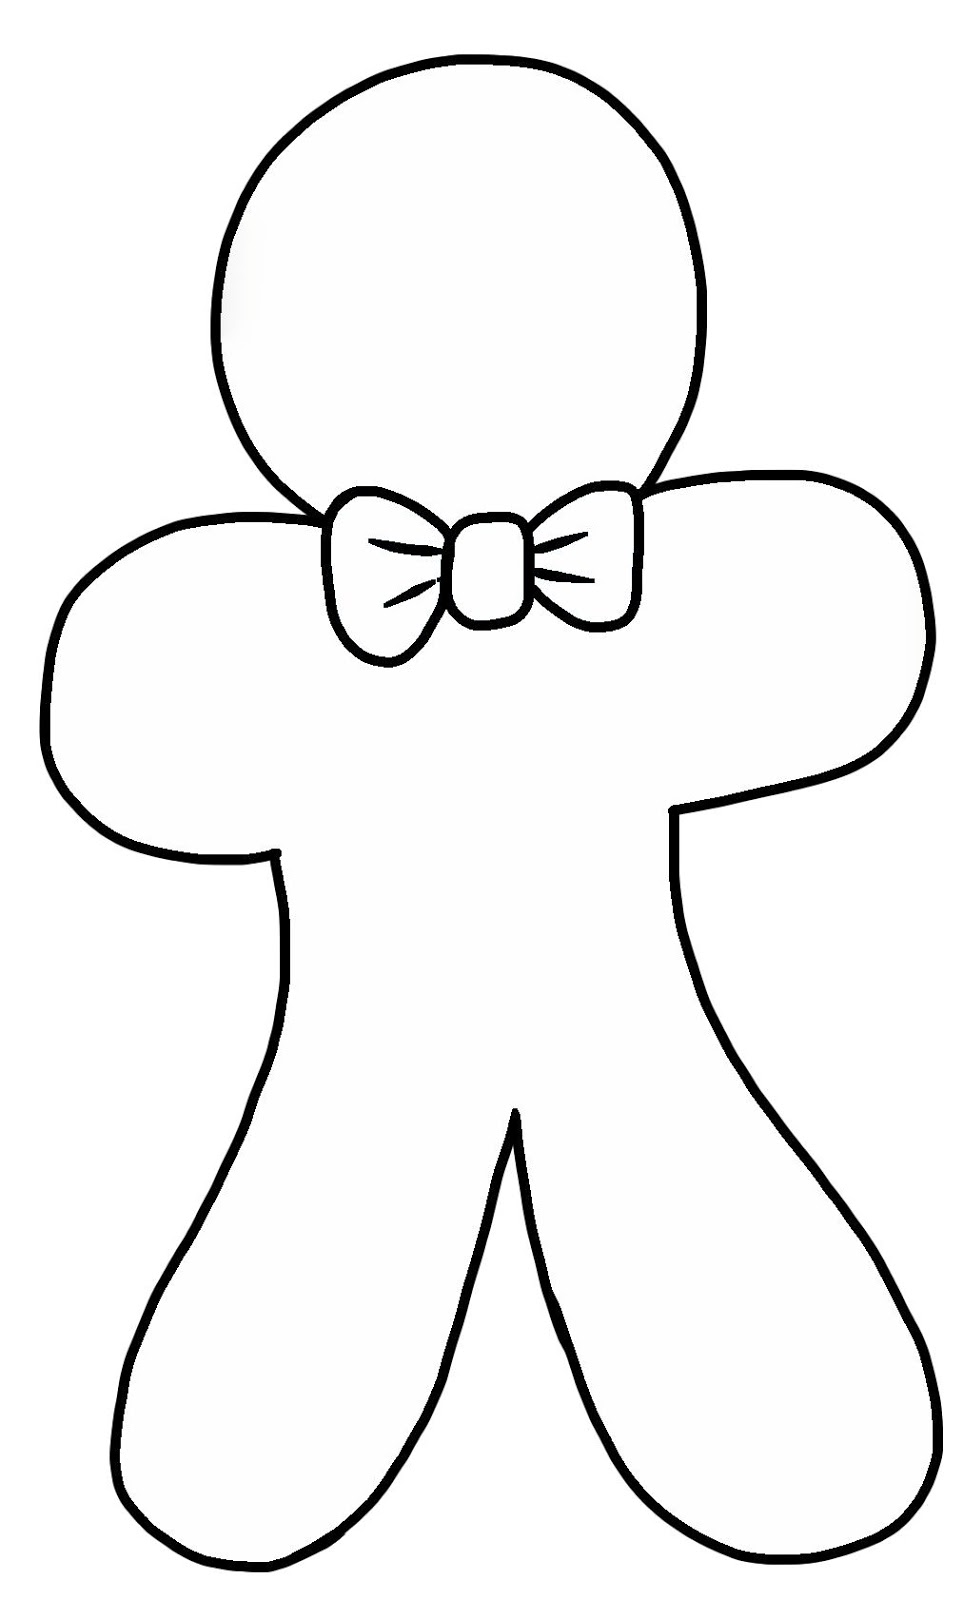 Images For > Gingerbread Woman Outline